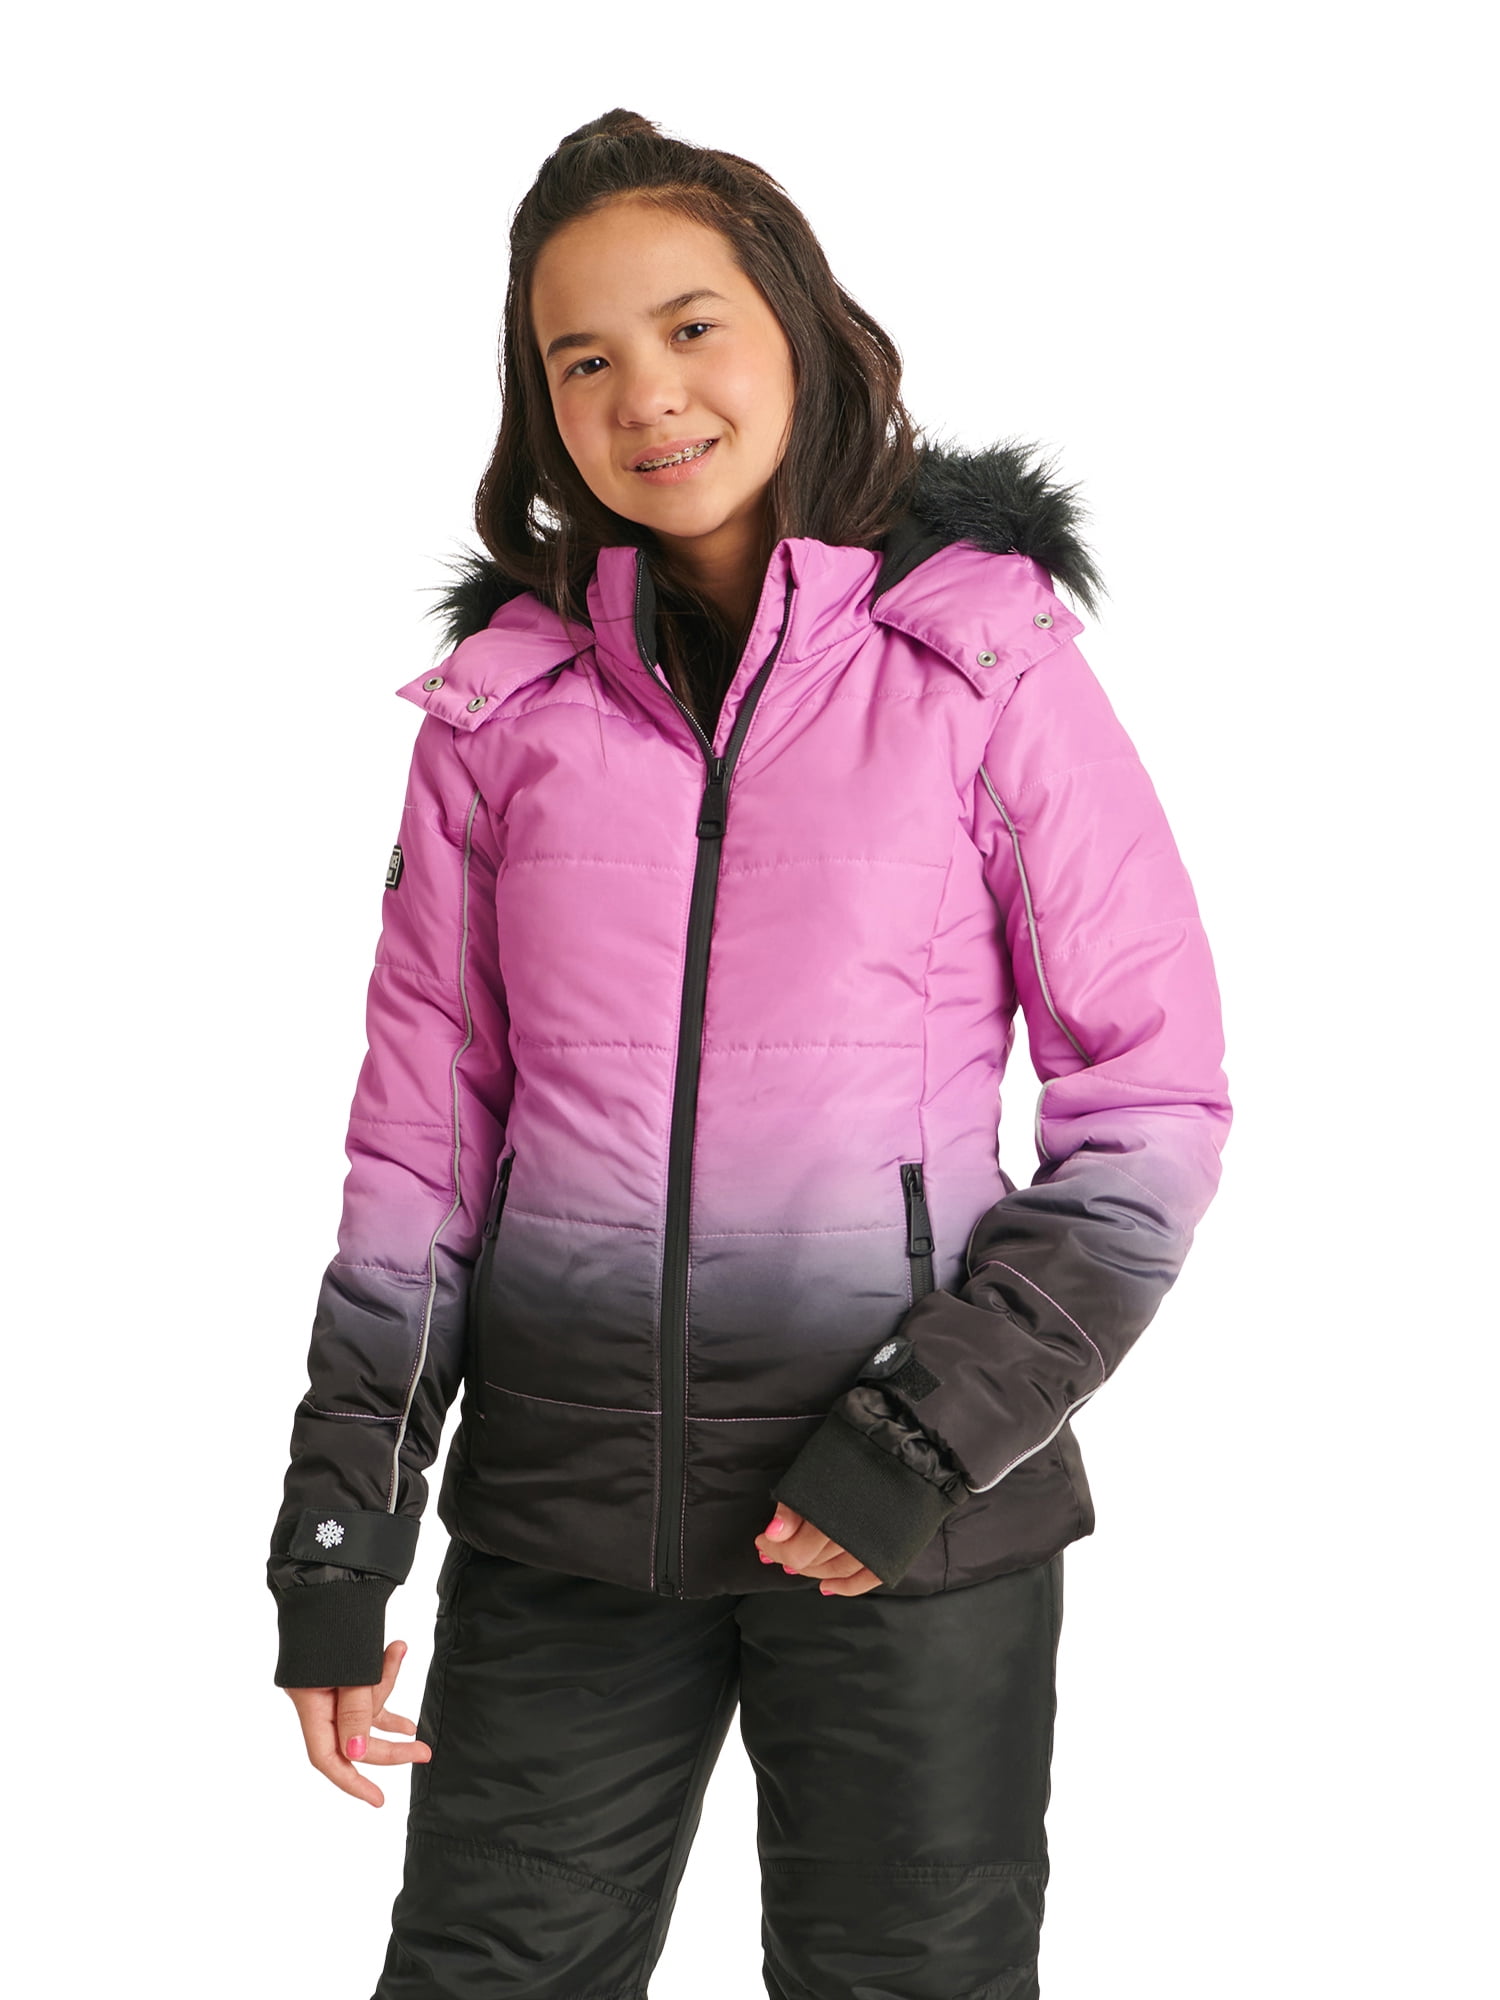 Snow Country Outerwear Big Girls Youth Ski Pants 7-16 - Warm & Cozy Winter  Gear